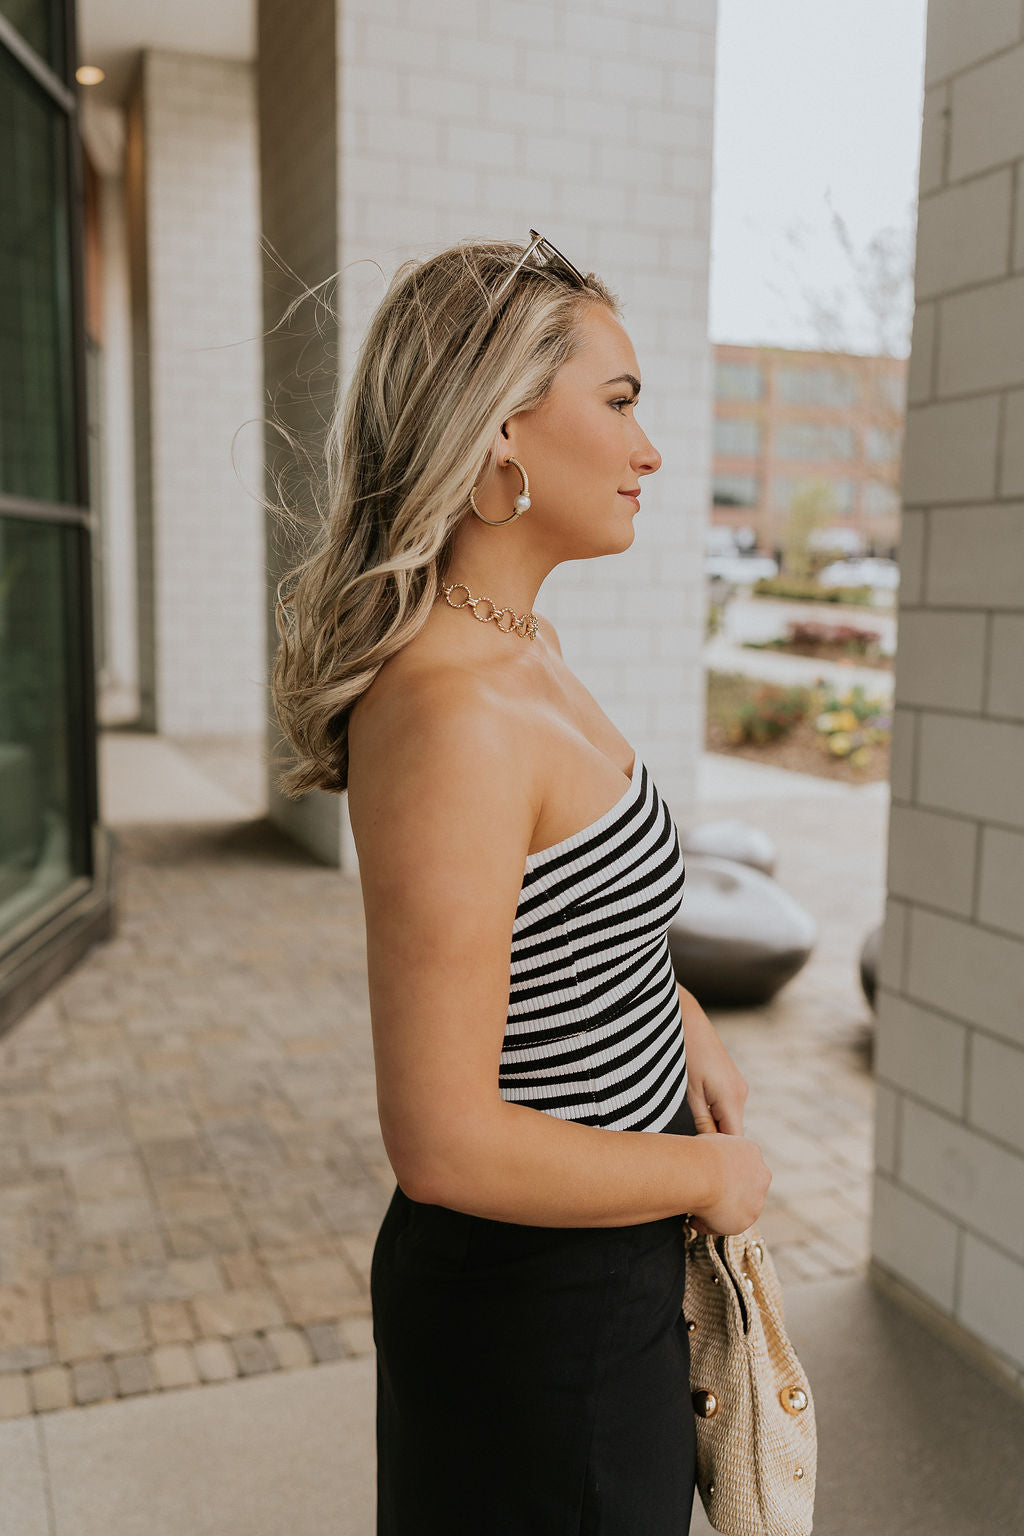 Upper body side view of female model wearing the Londyn White & Black Striped Tube Top that has horizontal white and black stripes and a straight strapless neckline. Worn with black skirt.